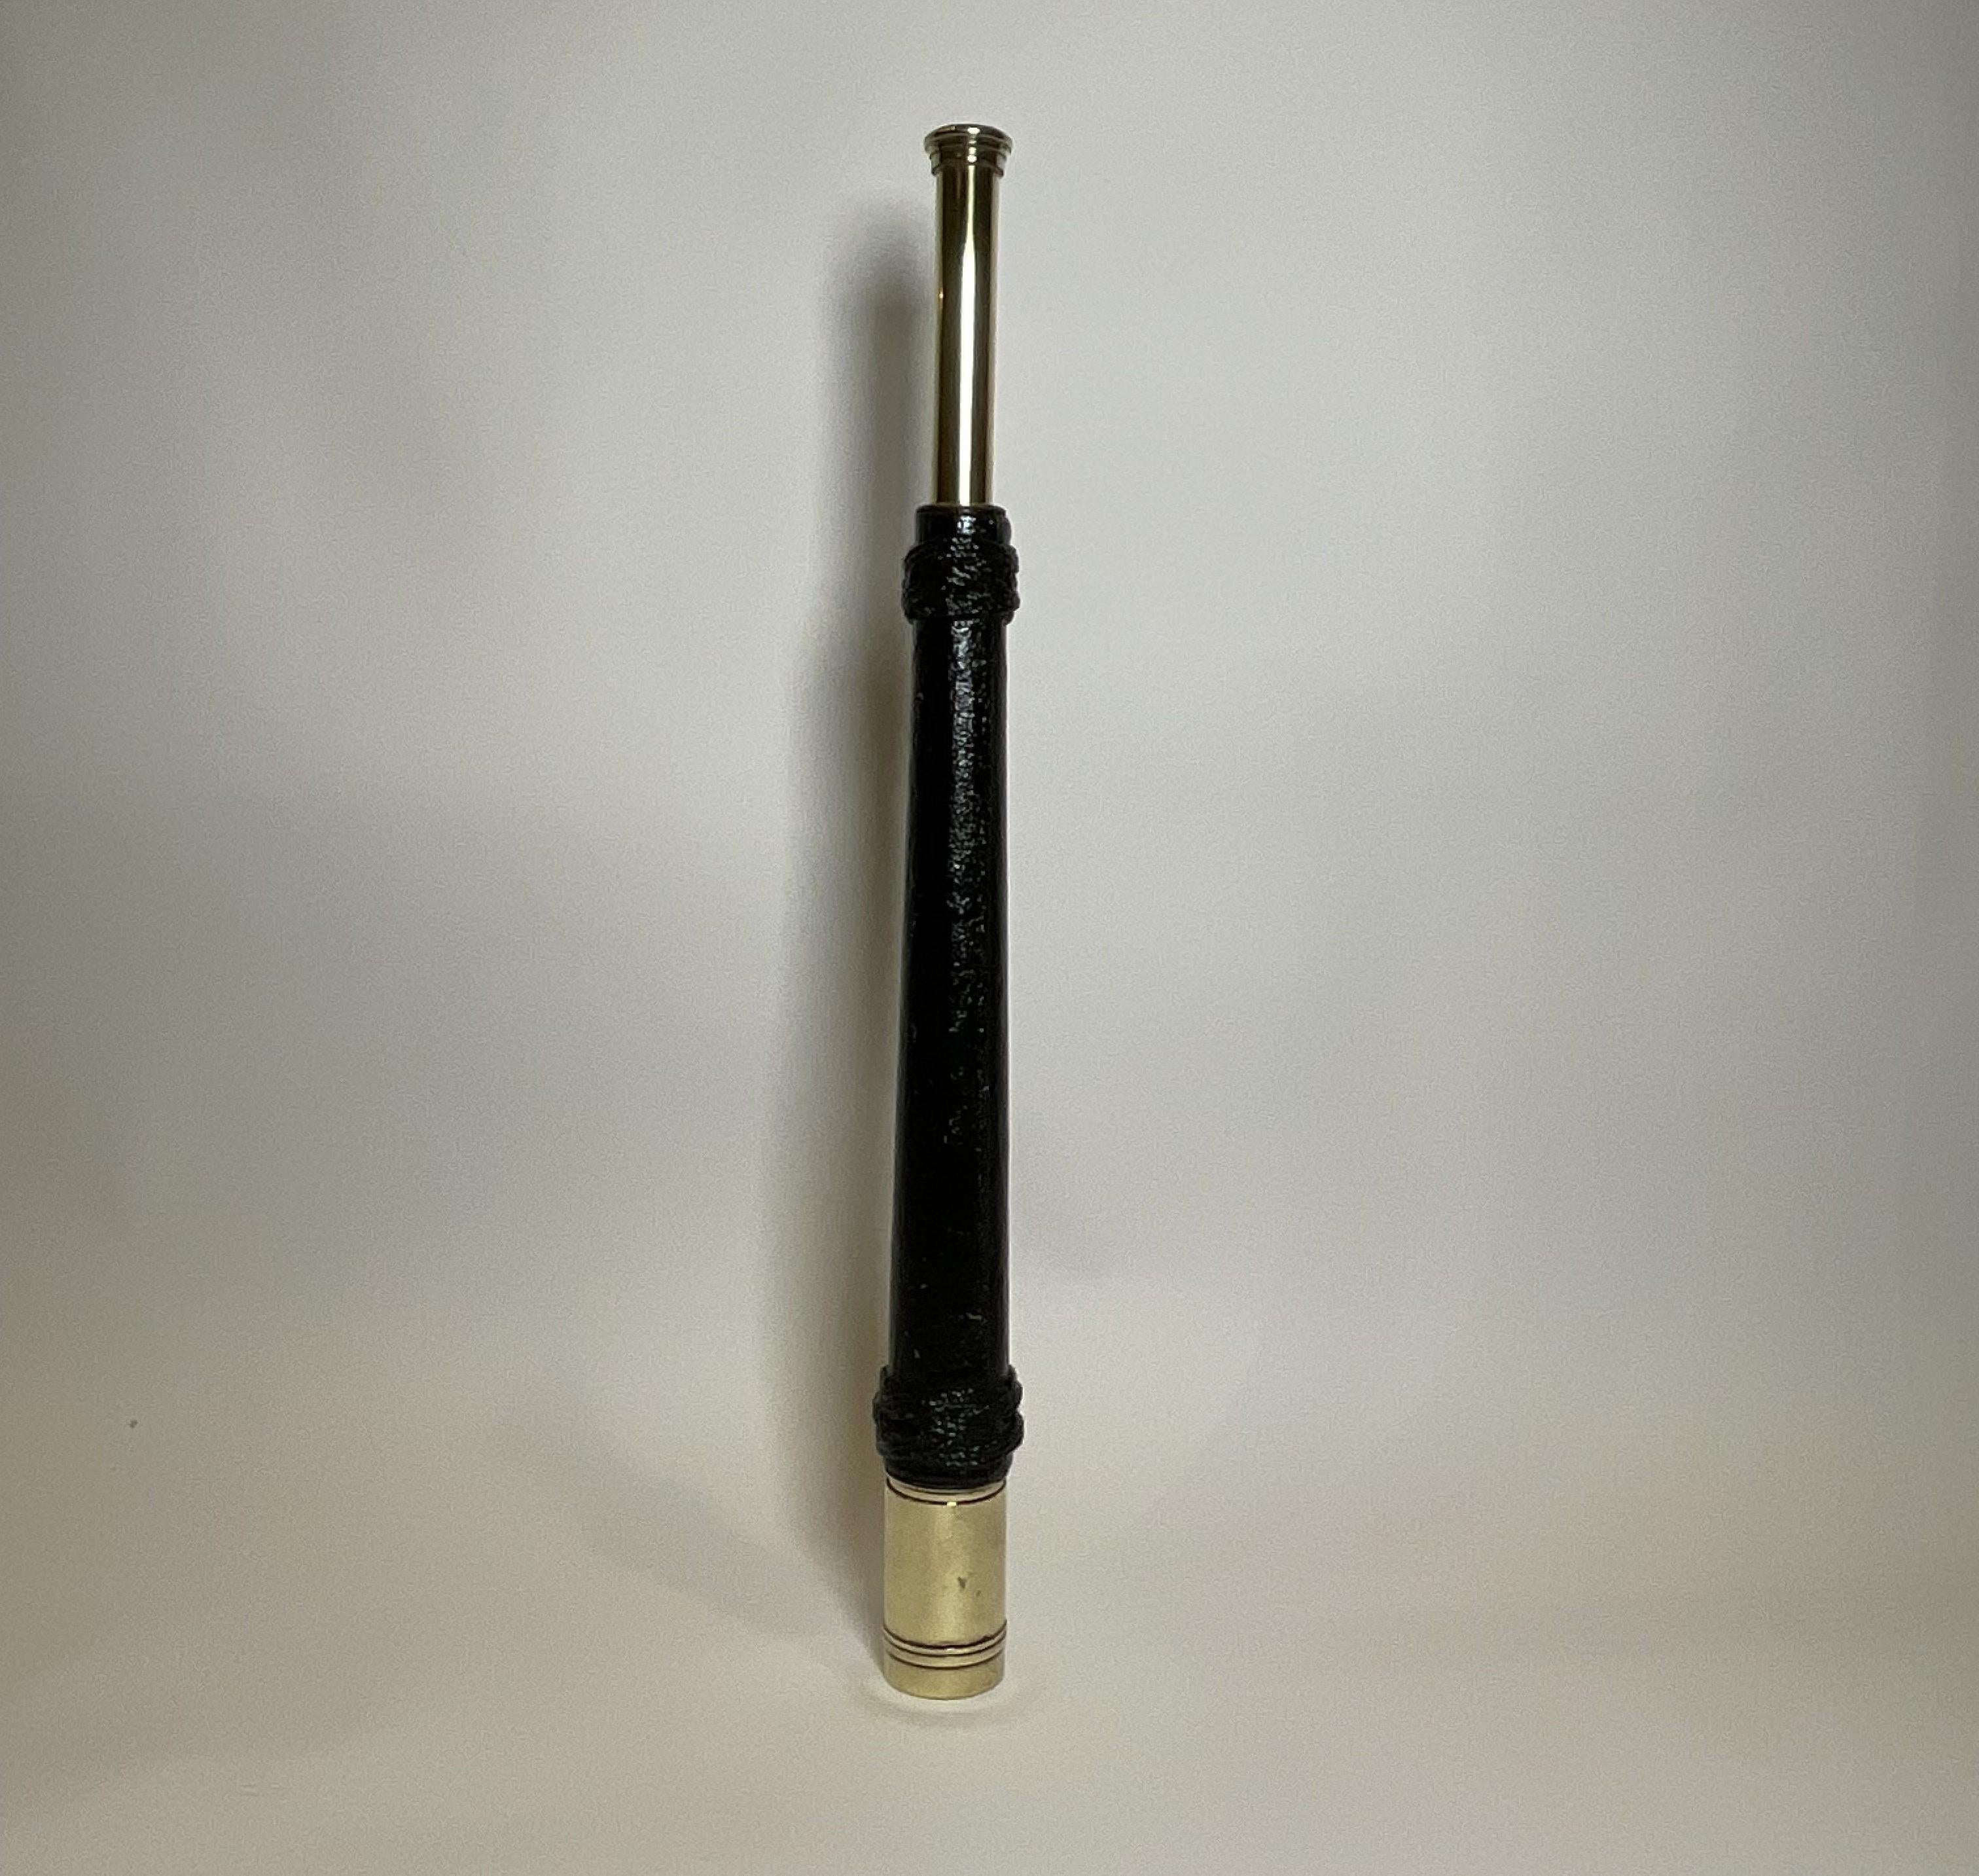 North American Ships Spyglass Telescope with Rope Cover For Sale